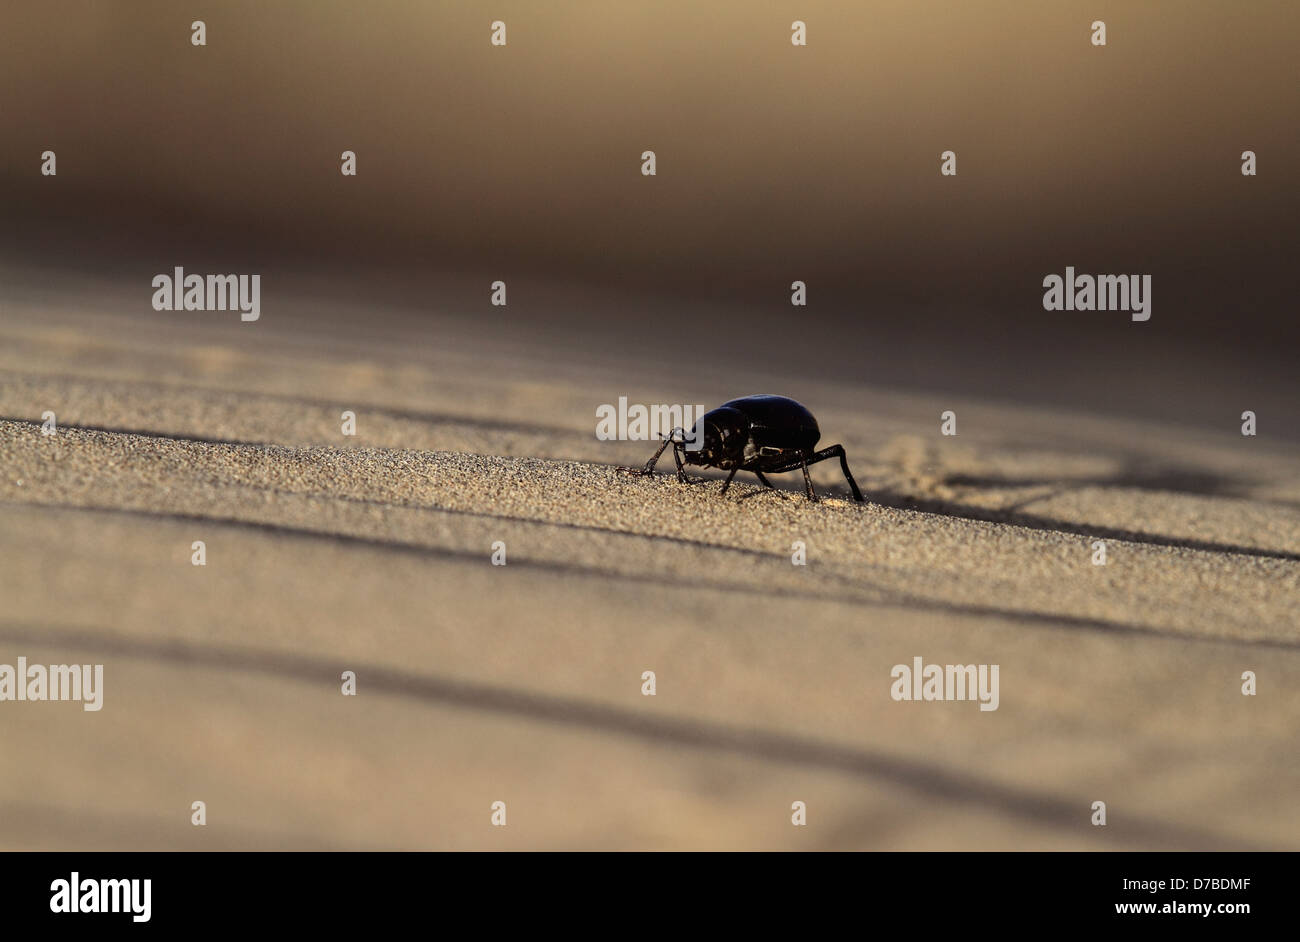 A beetle in sand dune Stock Photo